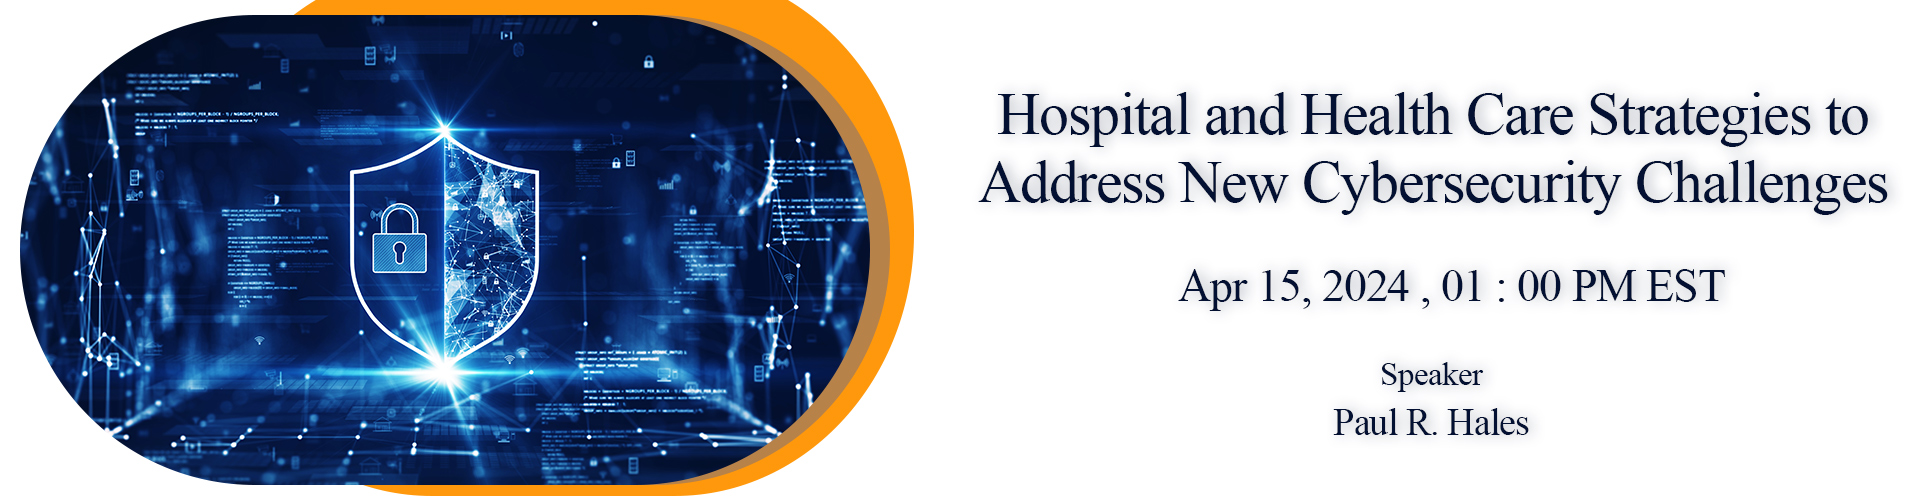 https://conferencepanel.com/conference/hospital-and-health-care-strategies-to-address-new-cybersecurity-challenges